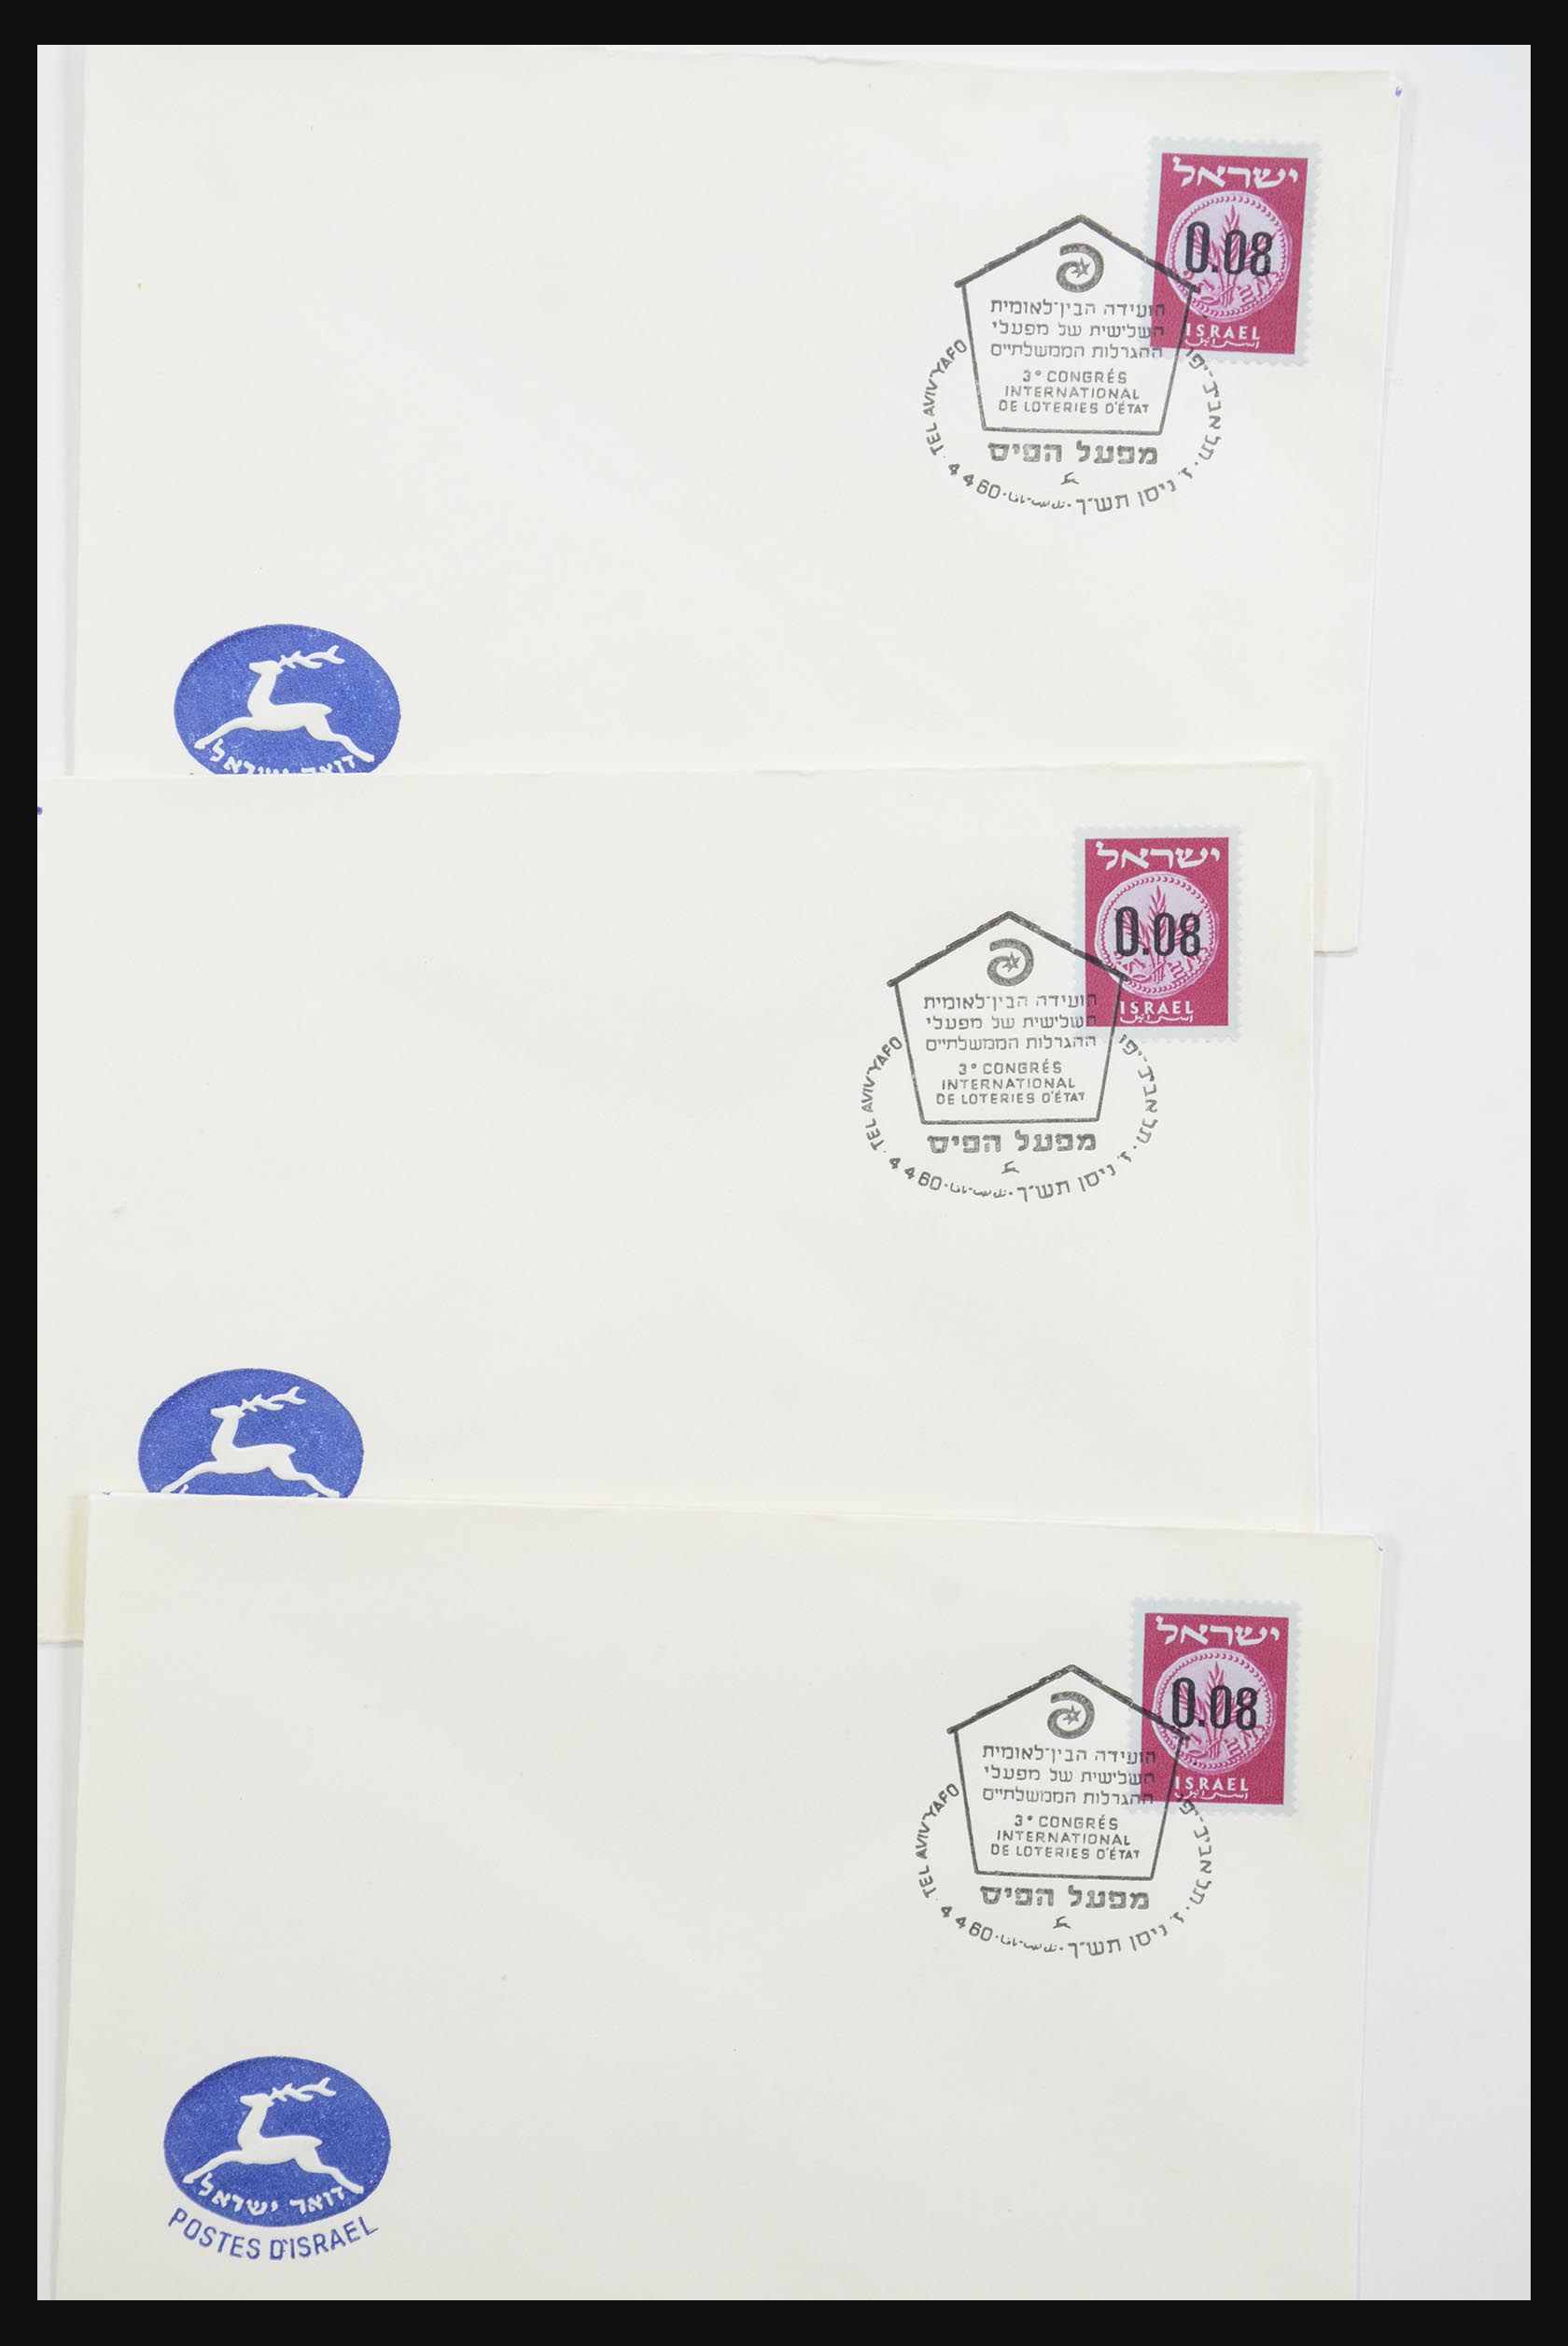 31924 081 - 31924 Israel first day cover collection 1957-2003.